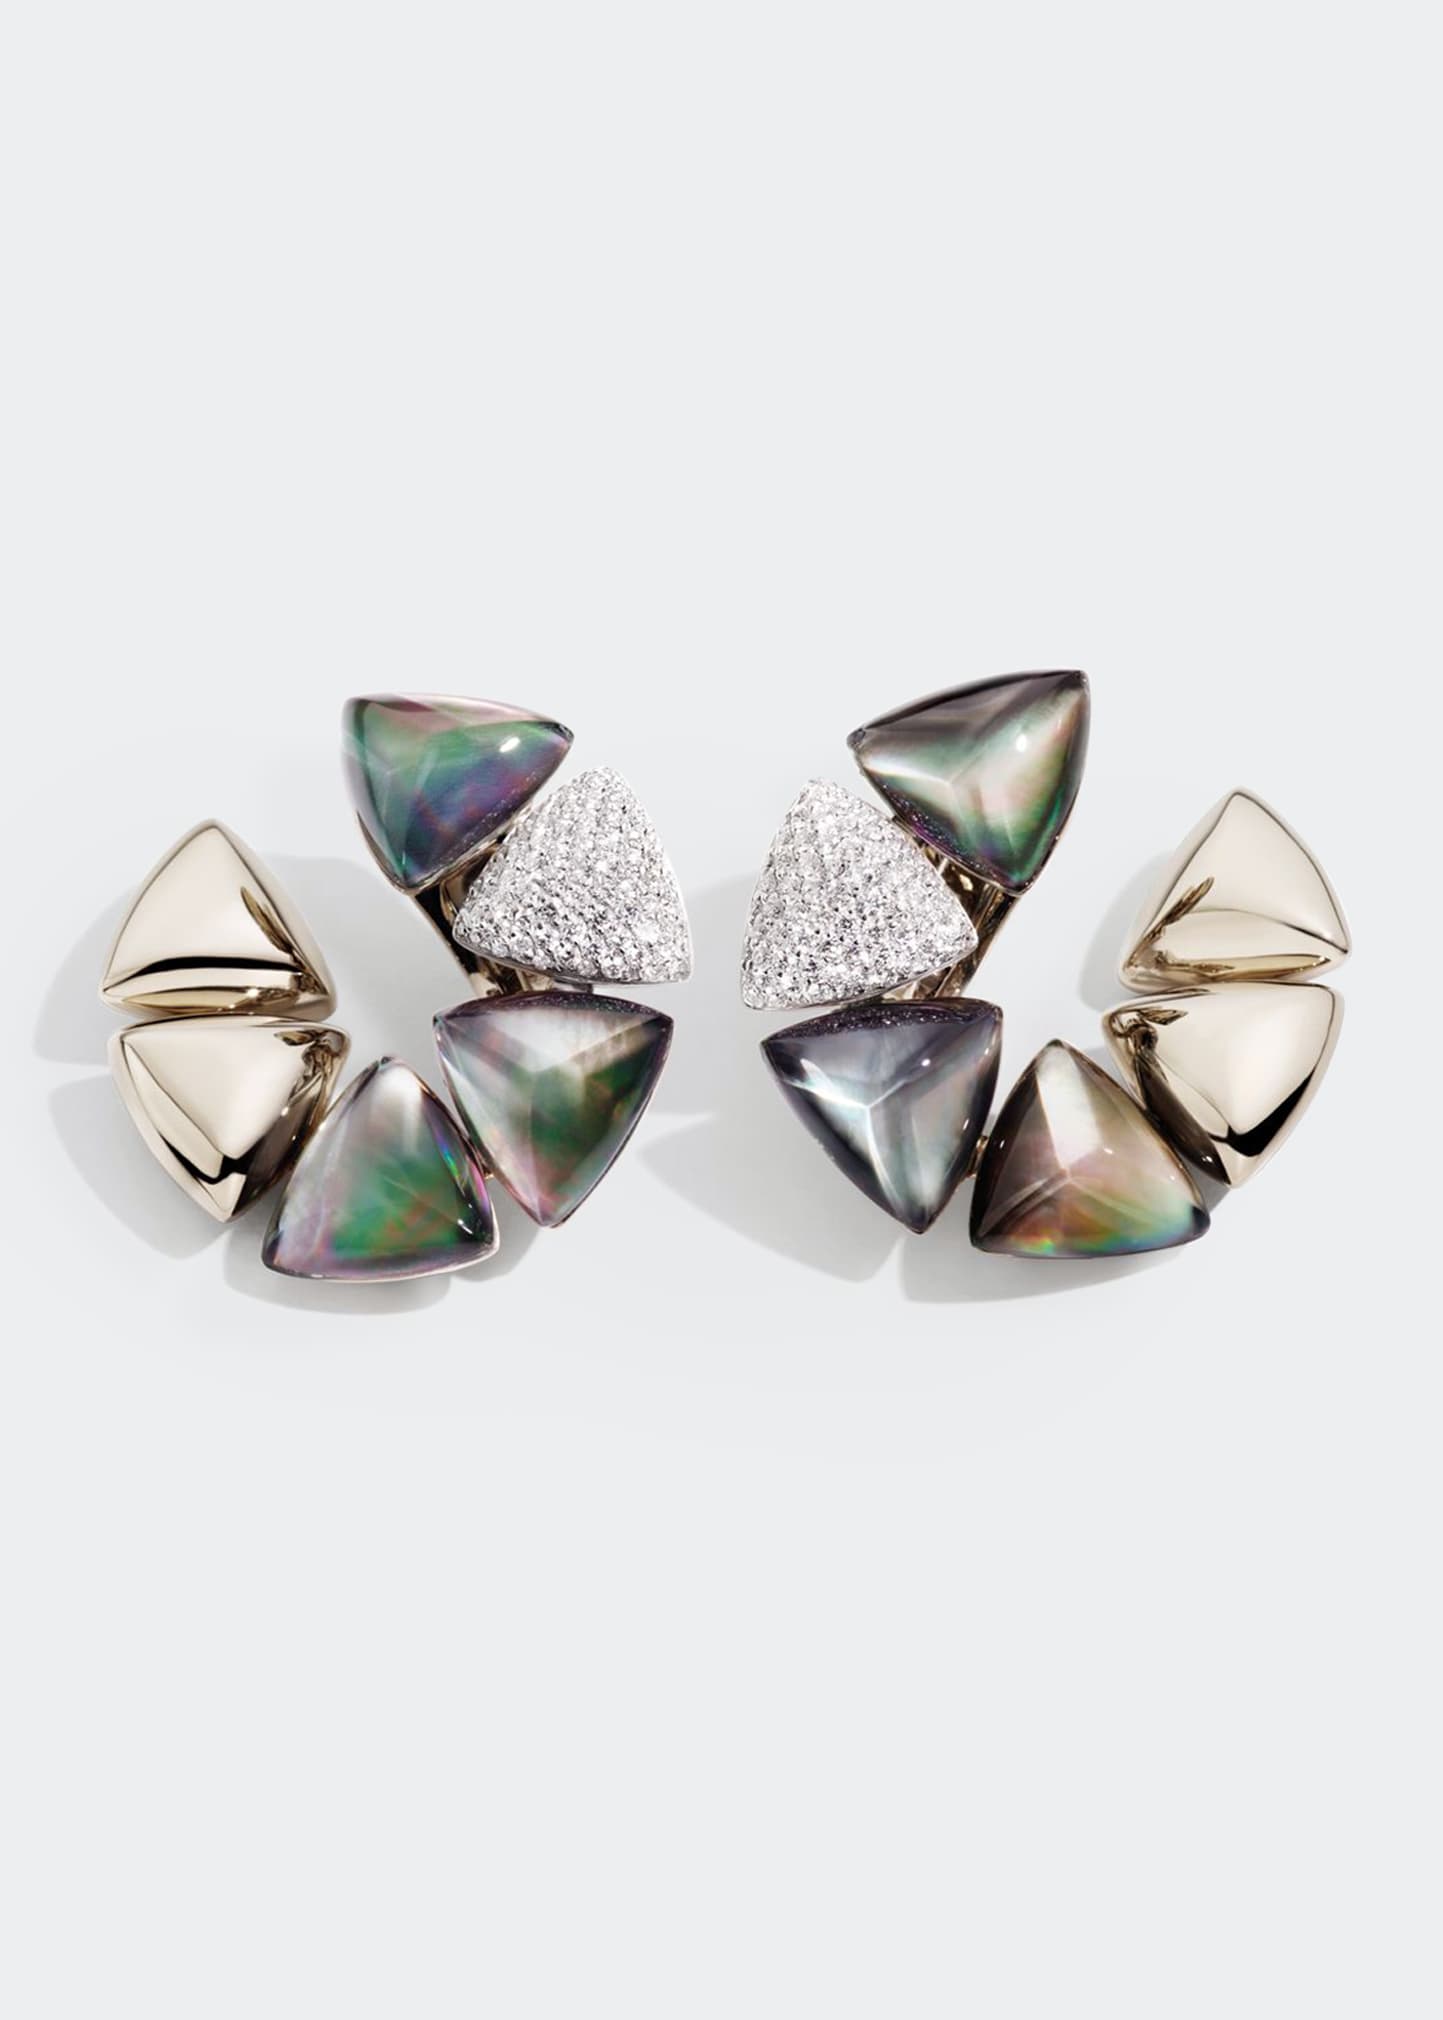 White Gold Freccia Clip Earrings with Gray Mother-of-Pearl, Rock Crystals and Diamonds